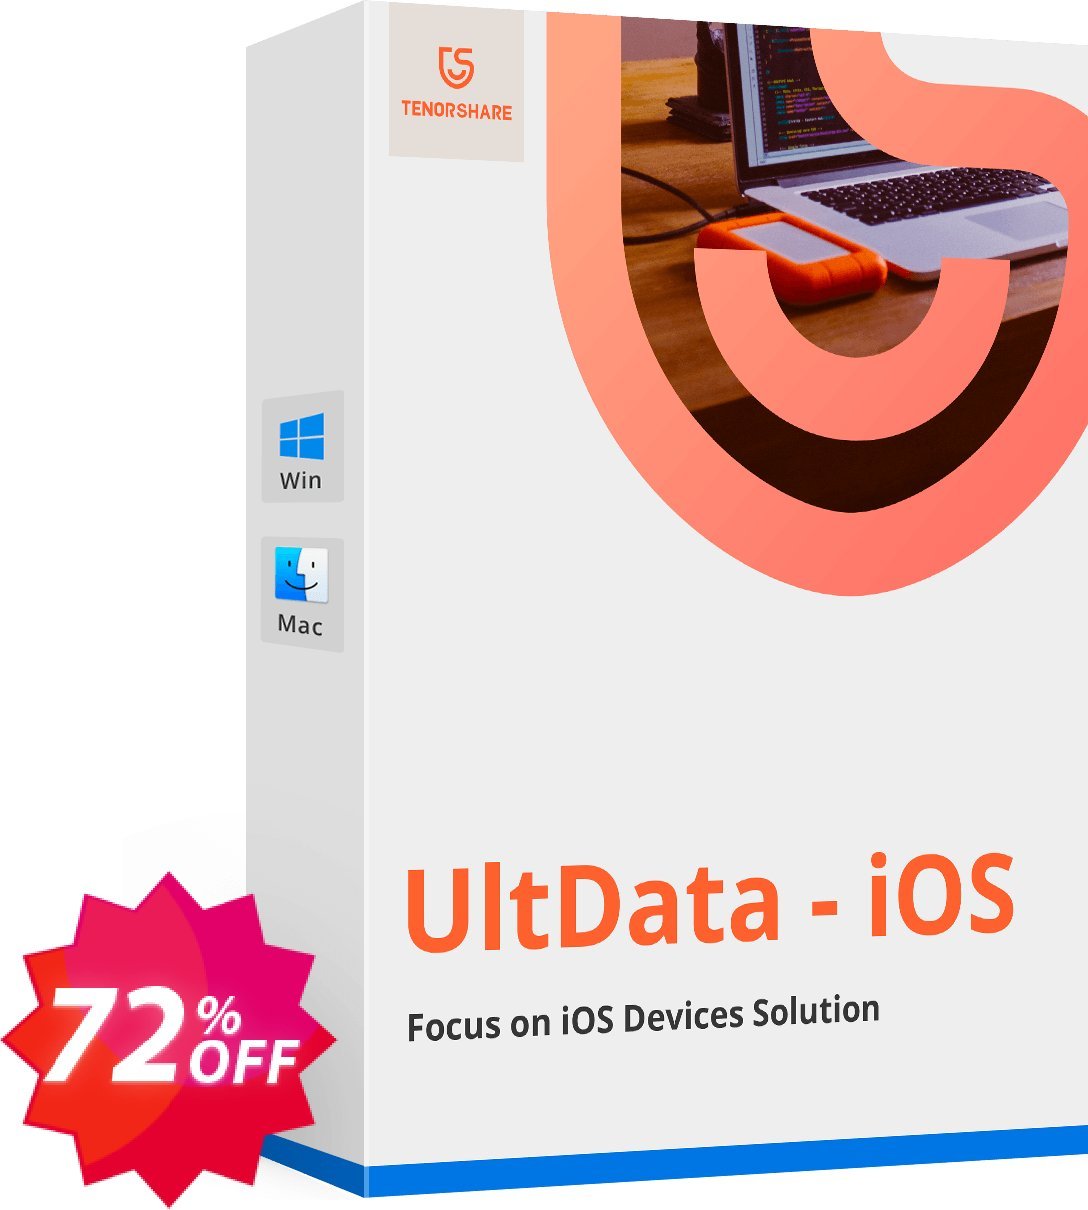 Tenorshare UltData for iOS, Lifetime  Coupon code 72% discount 